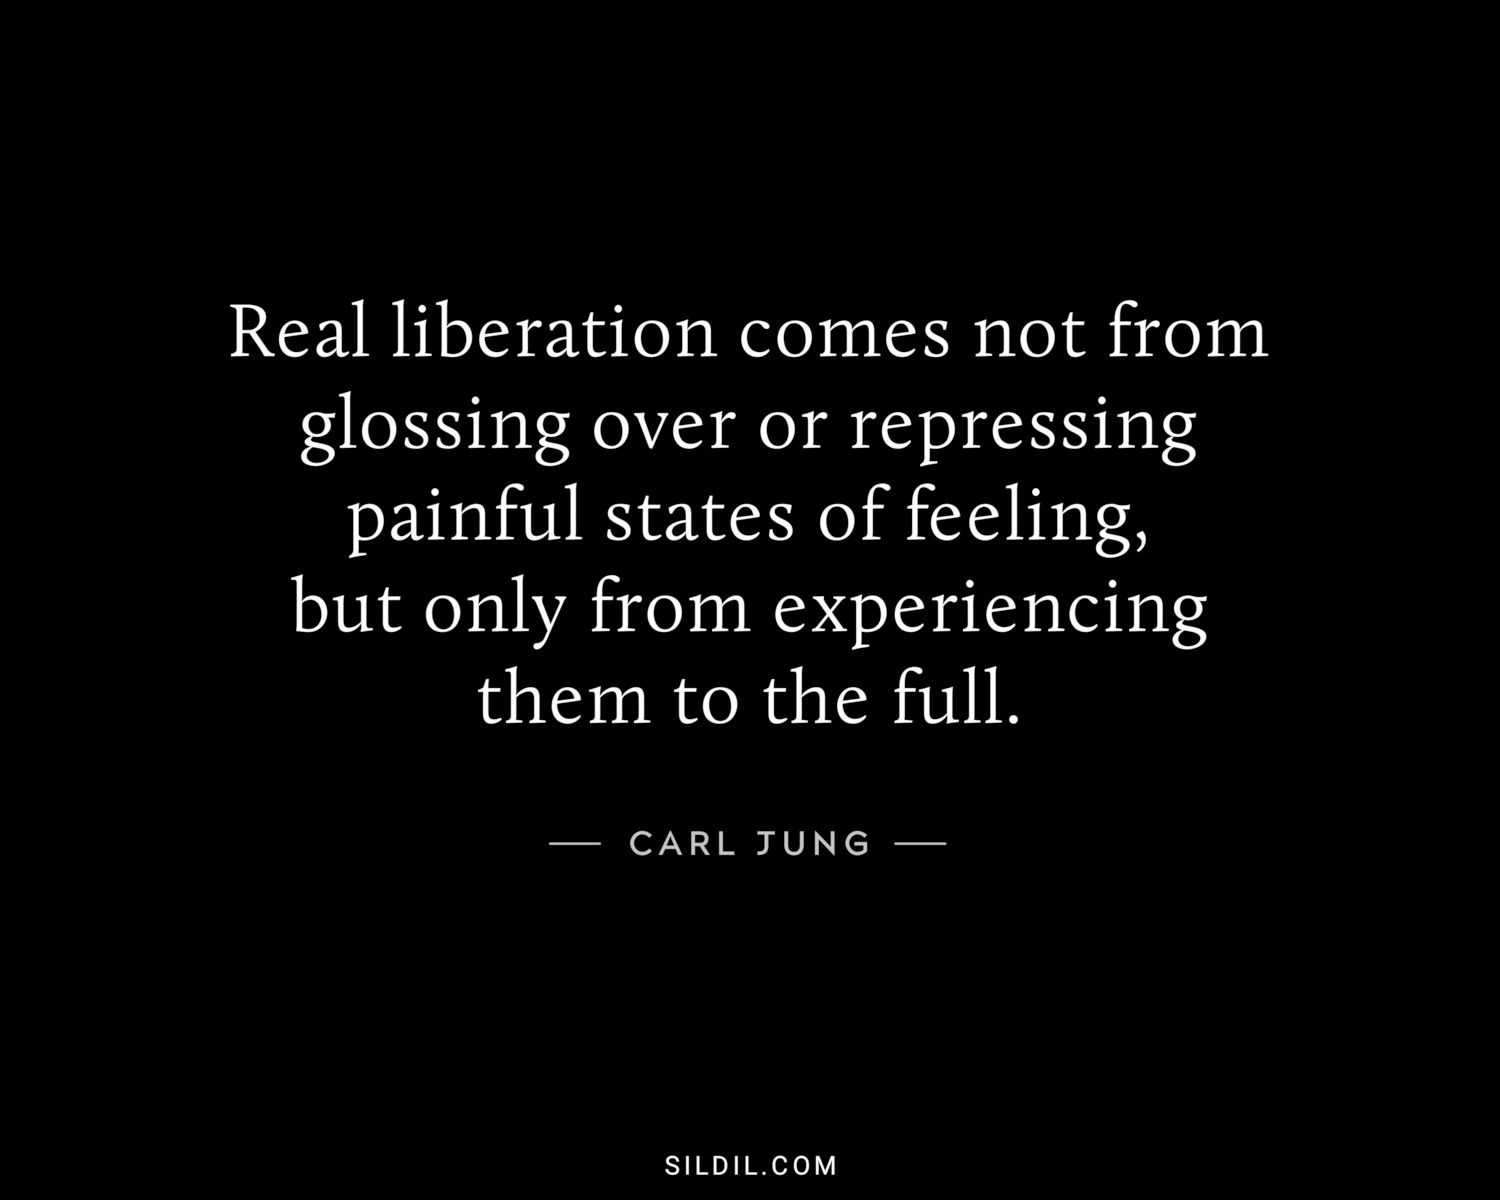 Real liberation comes not from glossing over or repressing painful states of feeling, but only from experiencing them to the full.